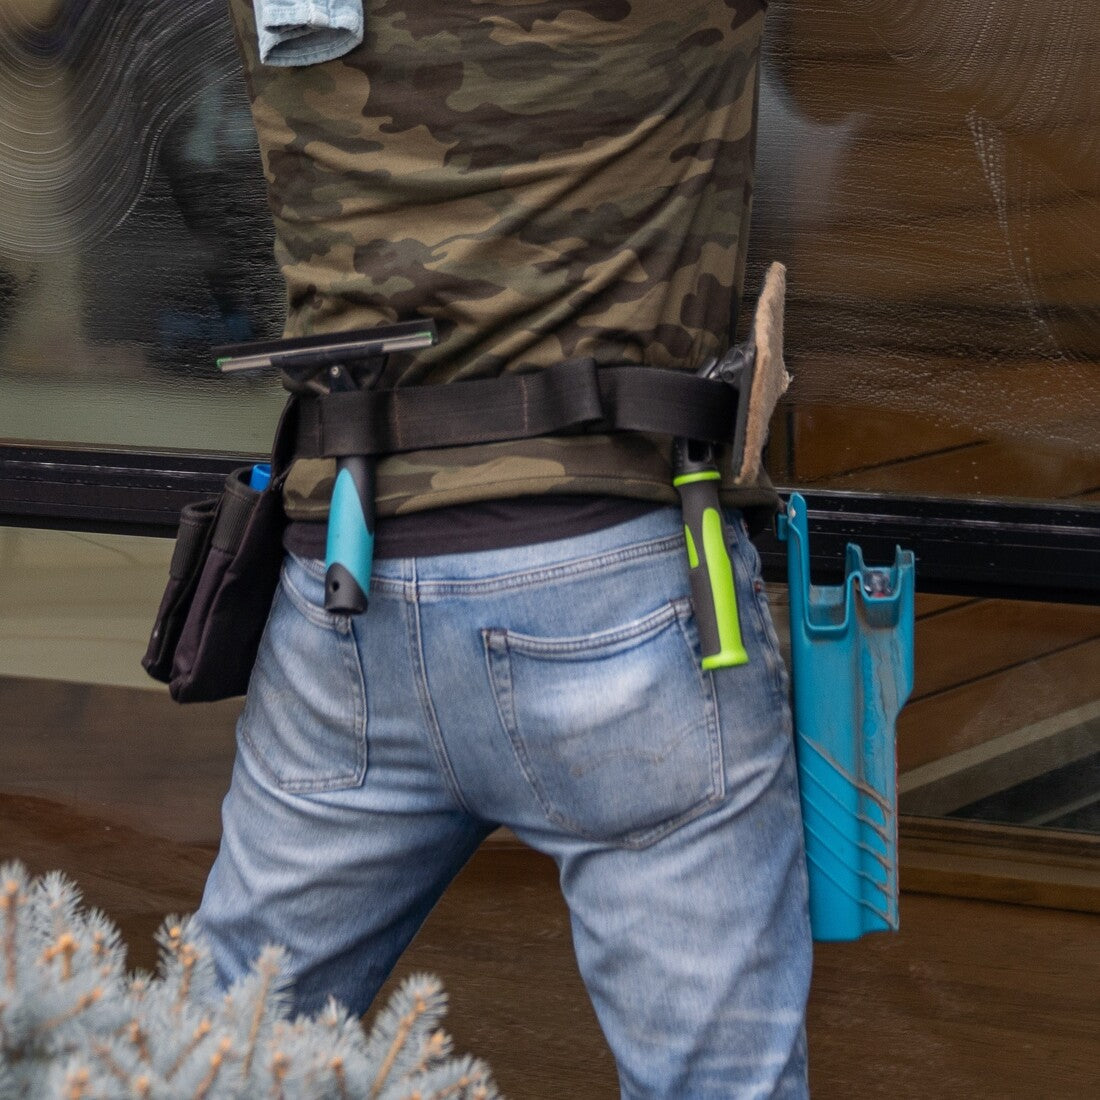 Window Cleaning Tool Belt In Use